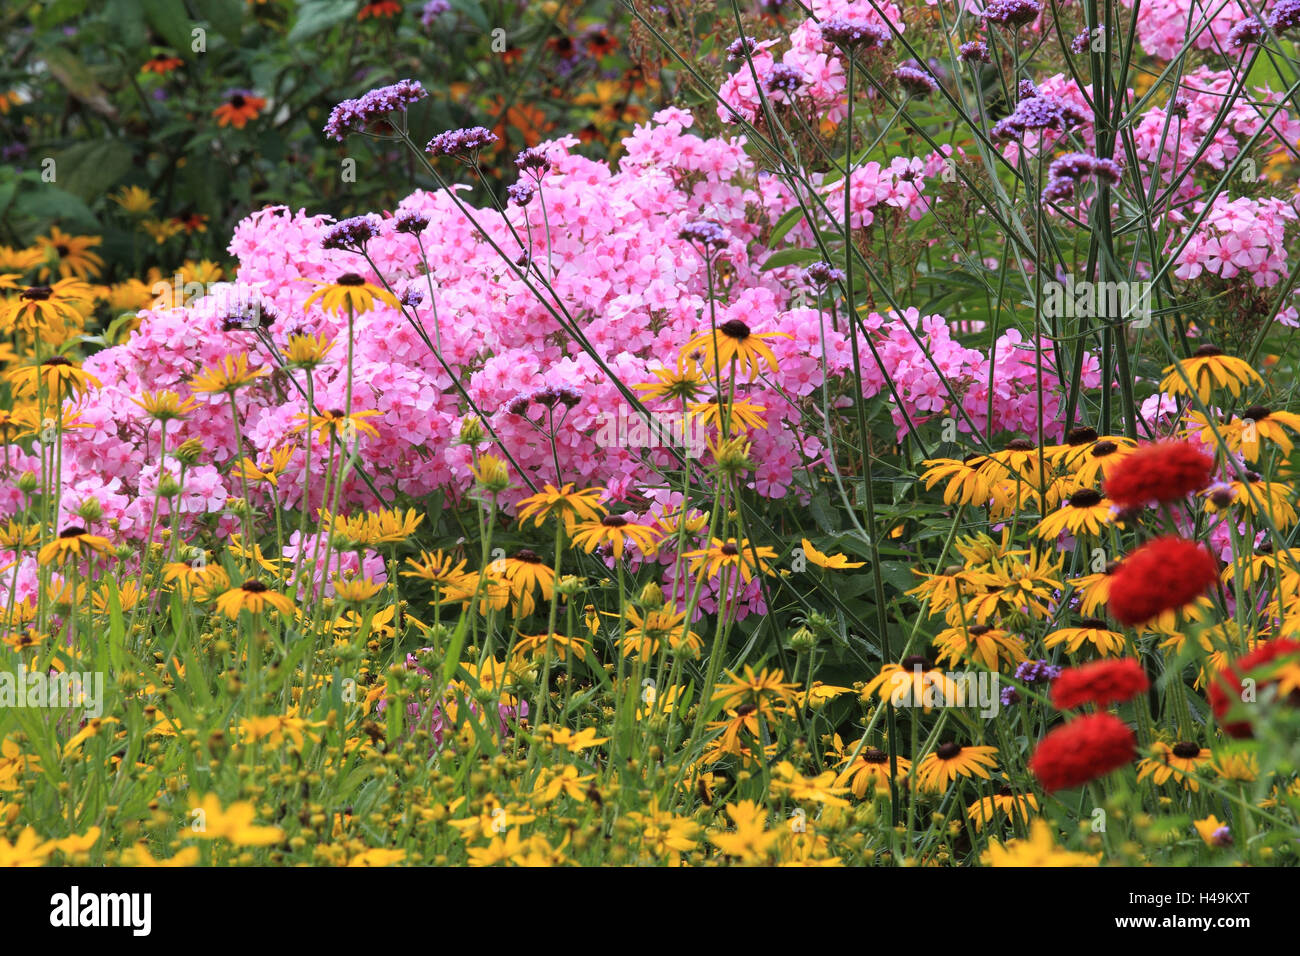 Garden with phlox and solar hat, Stock Photo